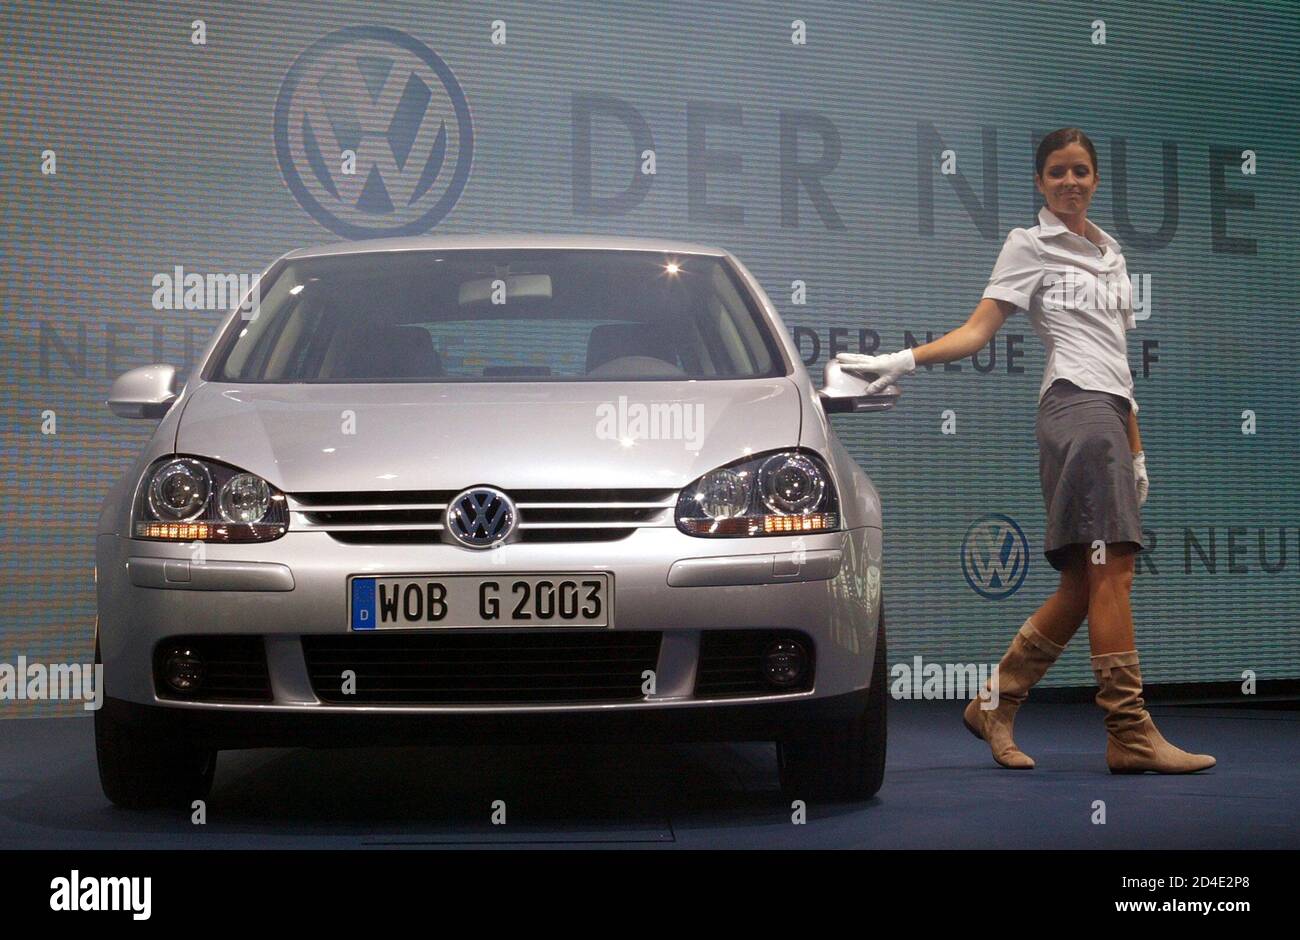 A model stands beside a new fifth generation Volkswagen Golf car during a  ceremony at the company's headquarters plant in Wolfsburg August 25, 2003.  Europe's biggest carmaker Volkswagen said on Monday it